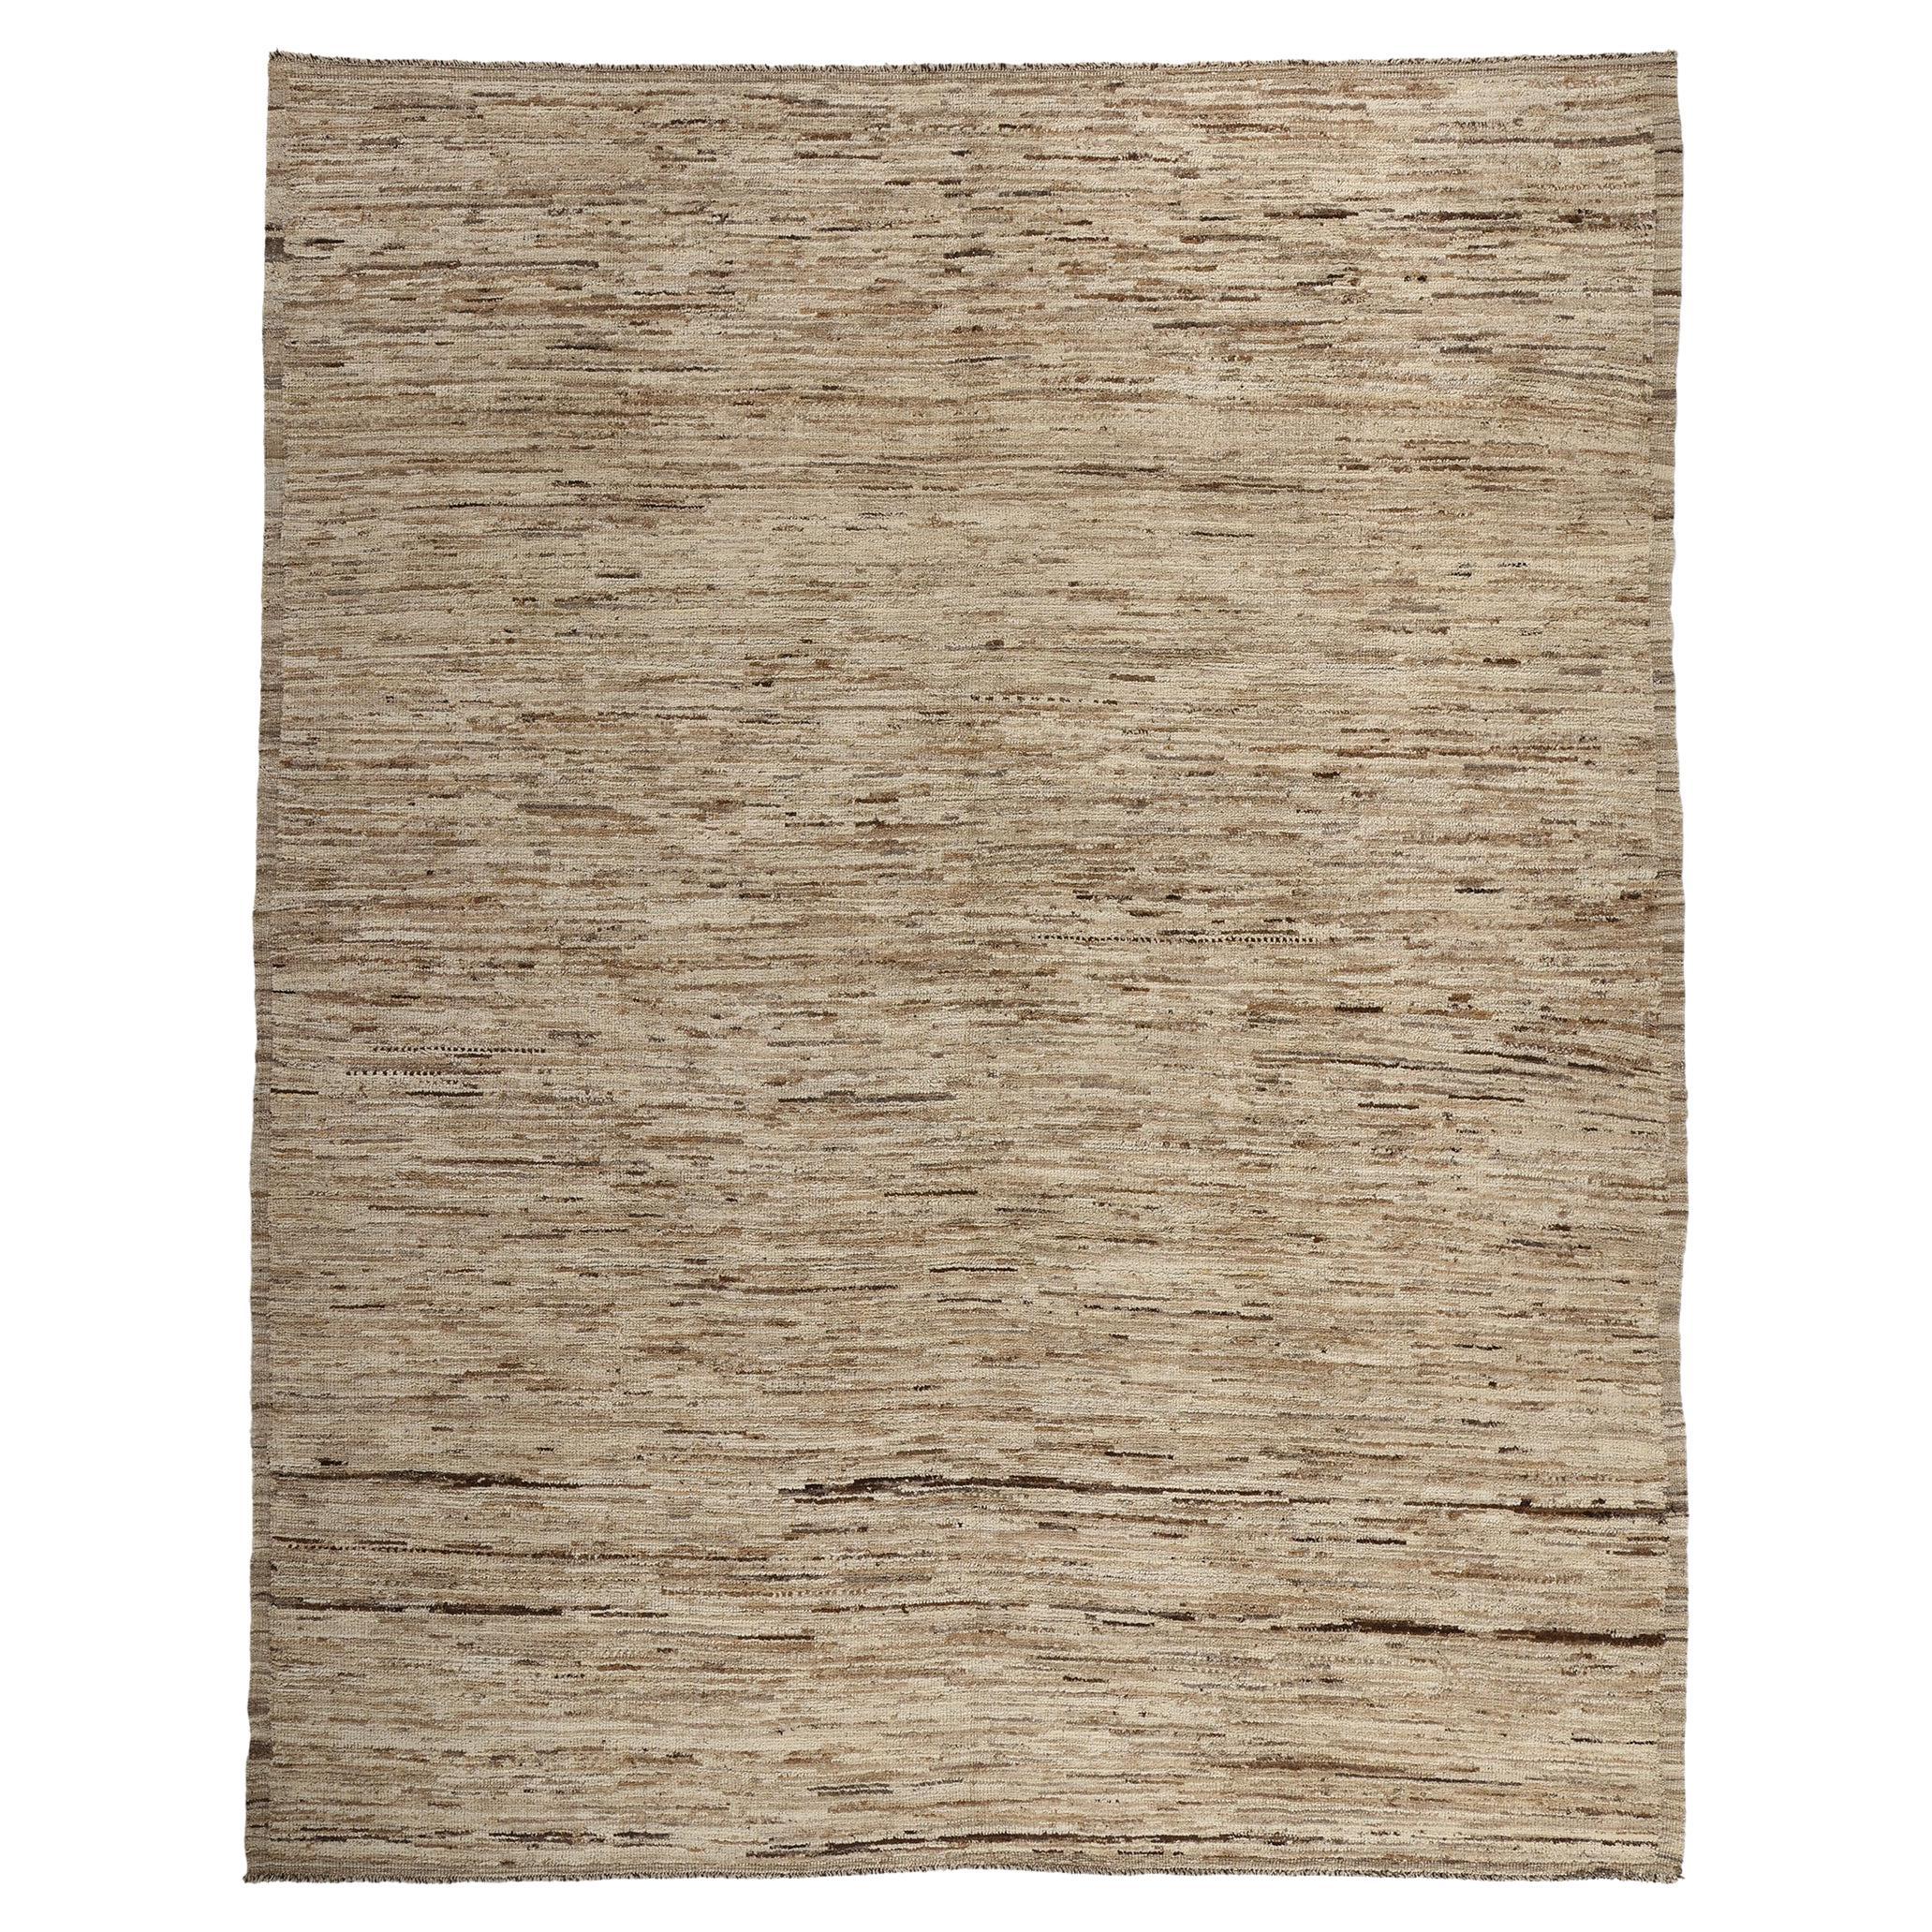 New Earth-Tone Moroccan Biophilic Shibui Rug Inspired by Nature For Sale